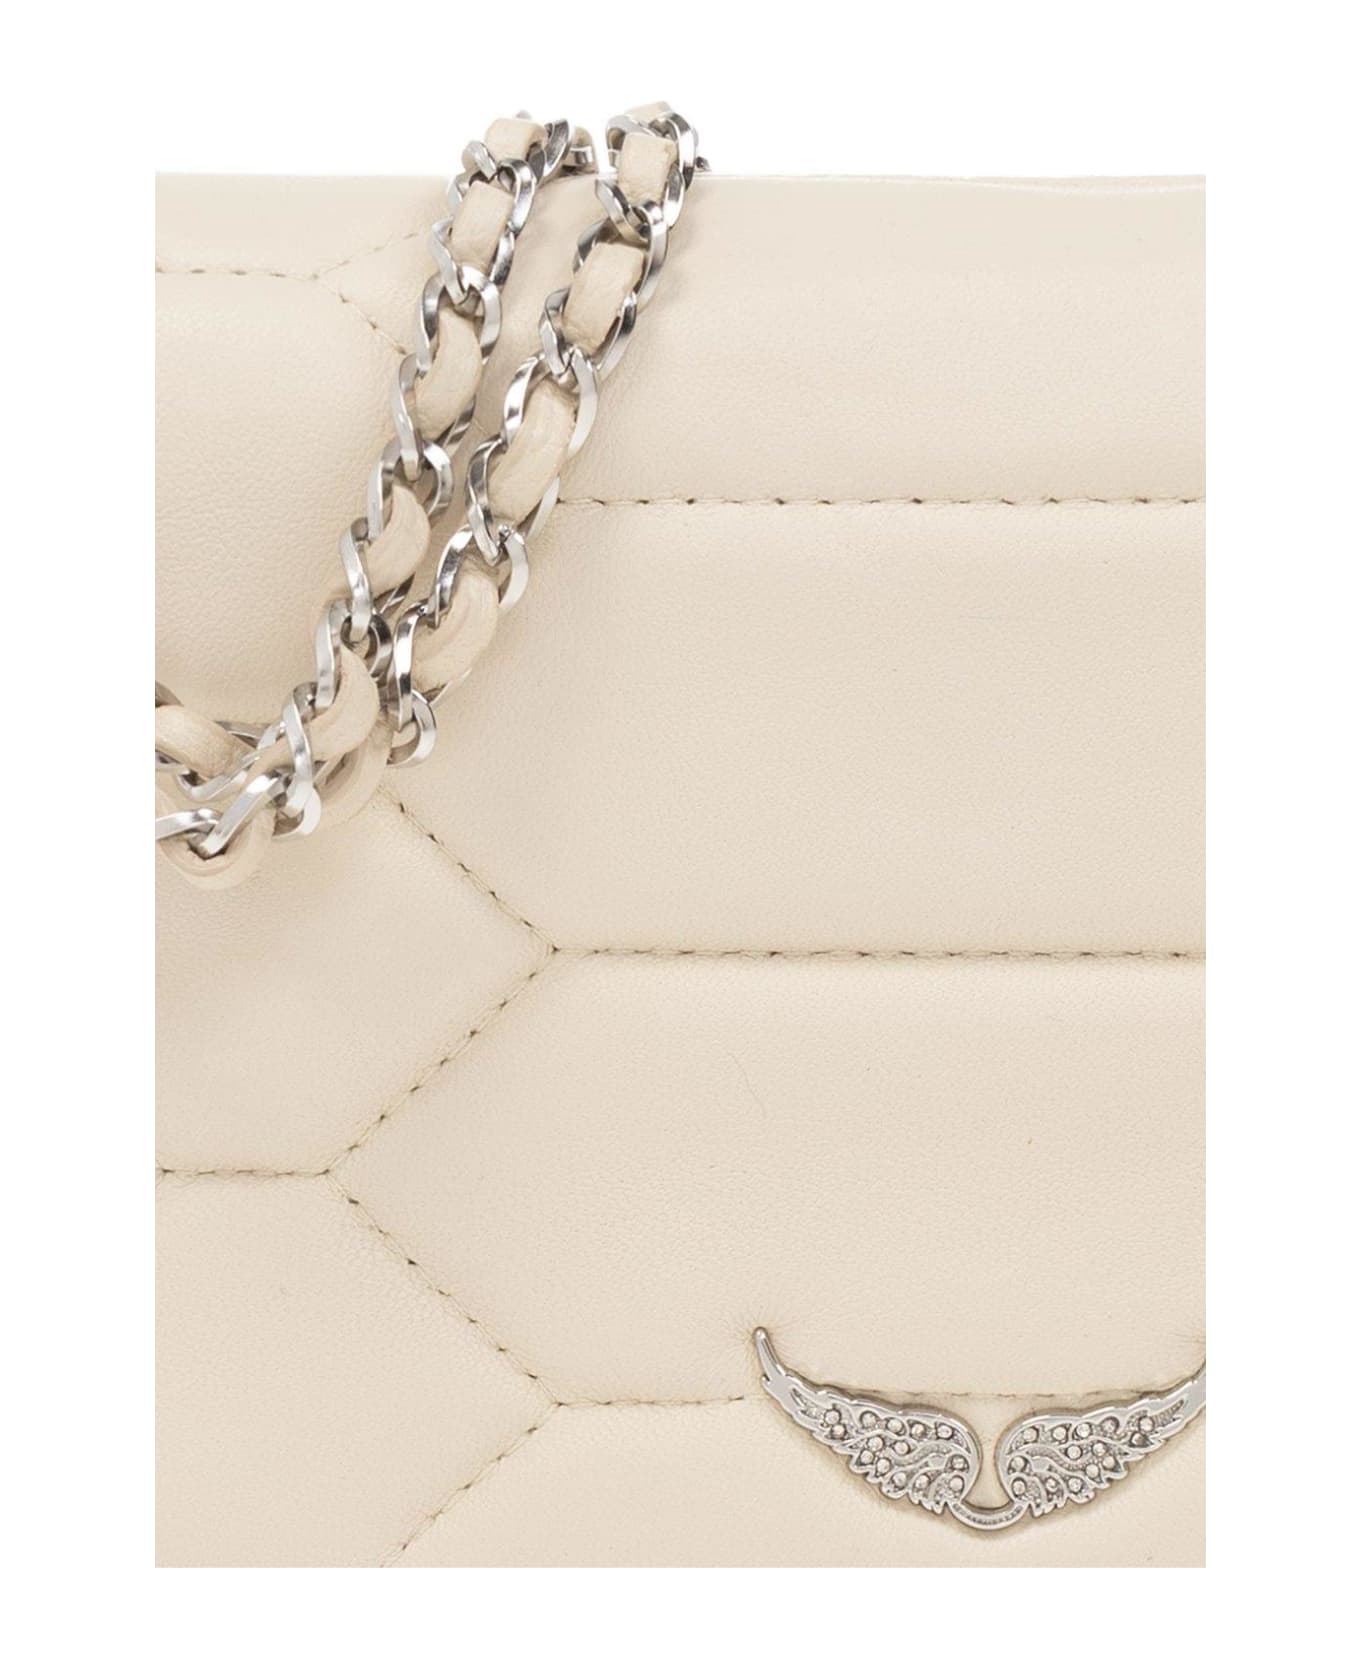 Zadig & Voltaire Rock Xl Quilted Clutch Bag - Cream ショルダーバッグ